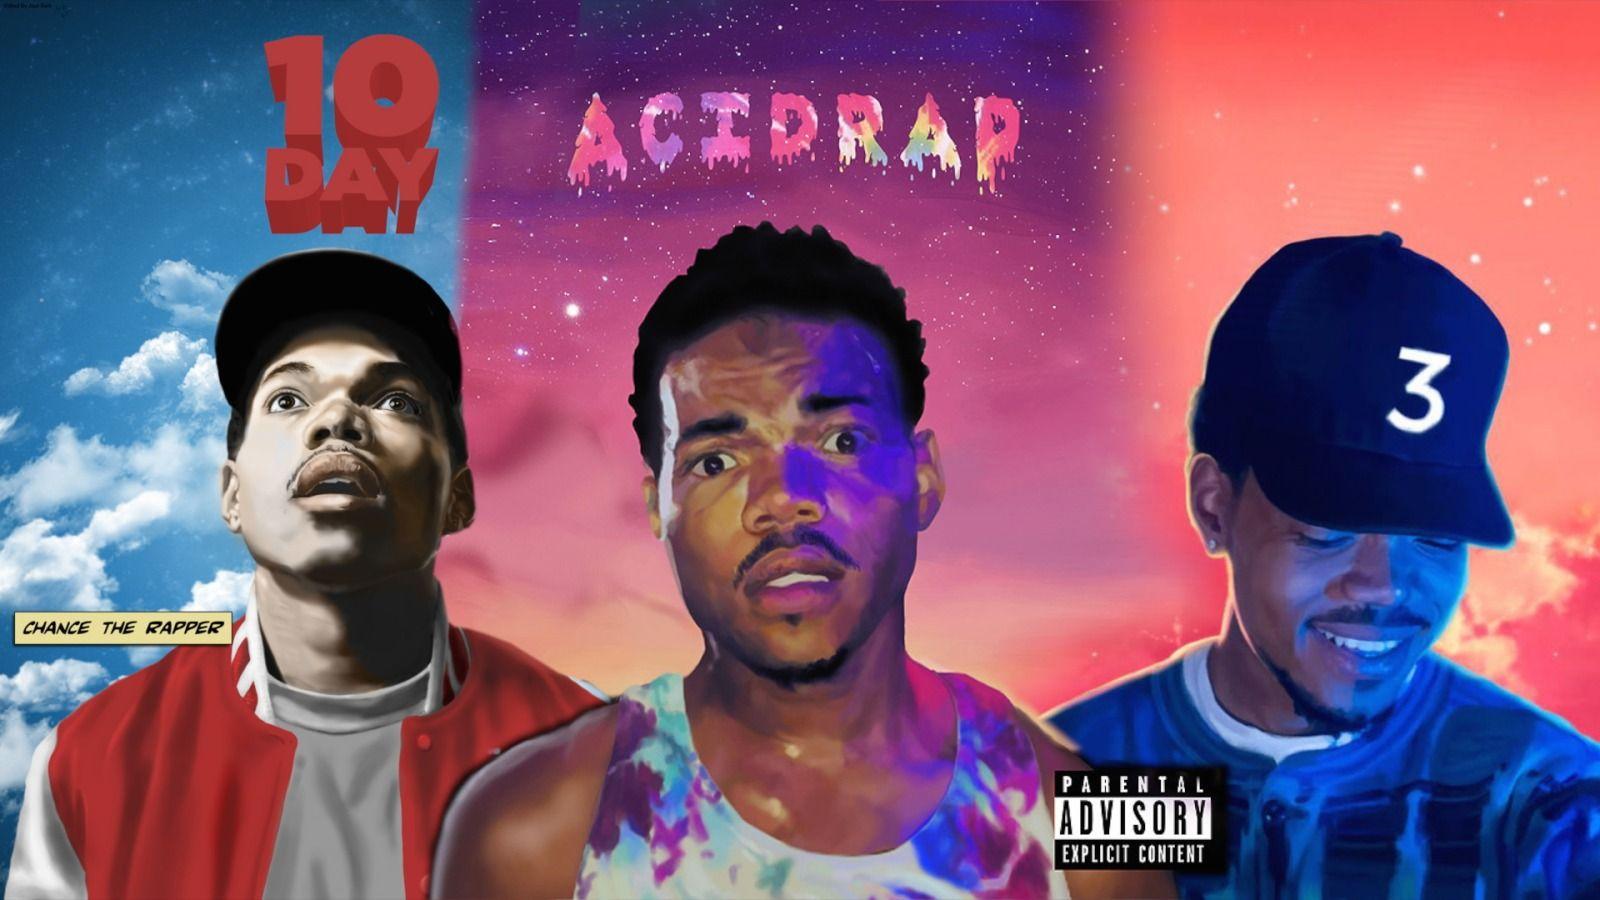 Chance The Rapper Wallpaper and Background Image